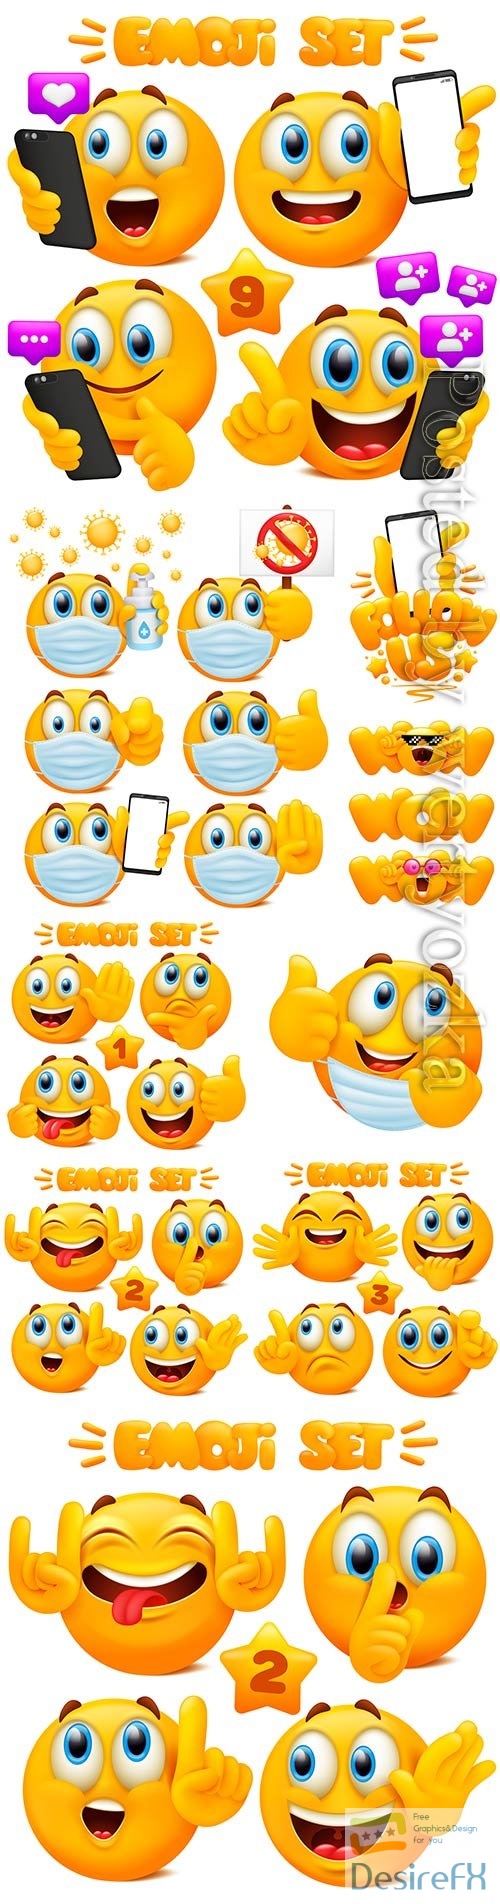 Set of yellow emoji cartoon characters with different facial expressions in glossy 3d